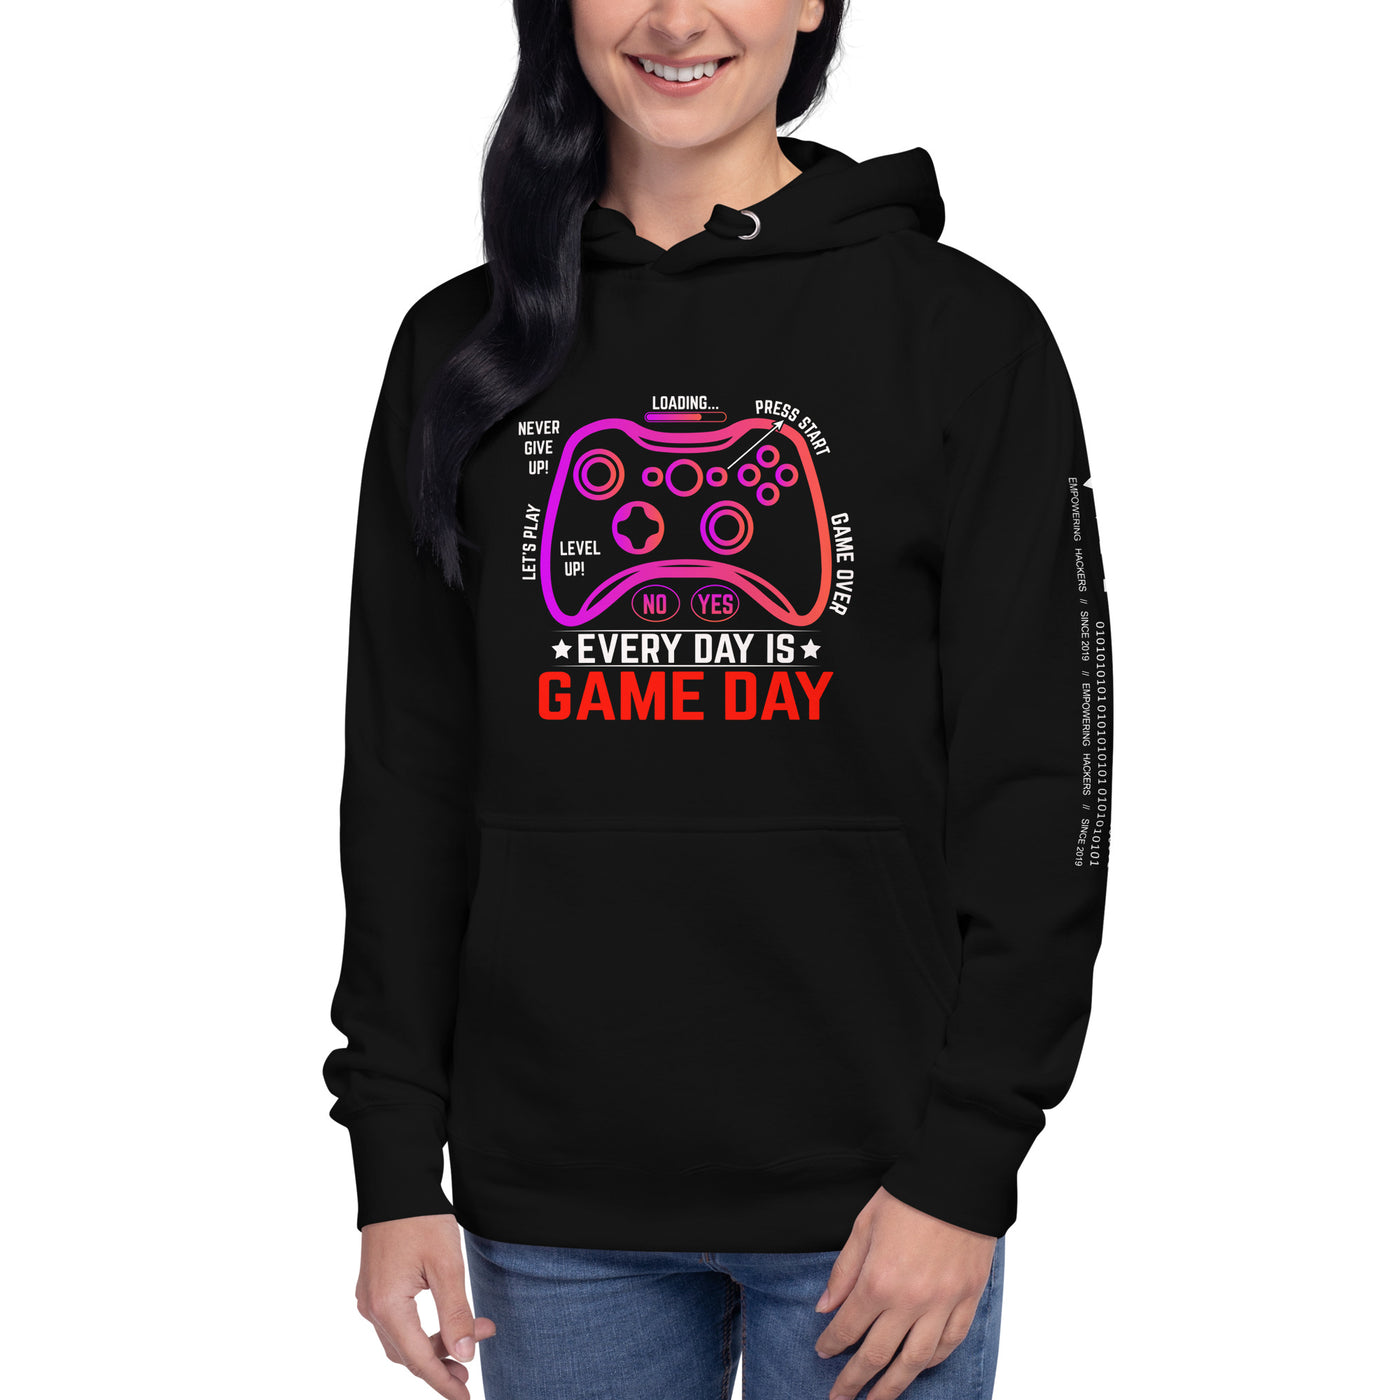 Never Give Up, everyday is Game Day - Unisex Hoodie